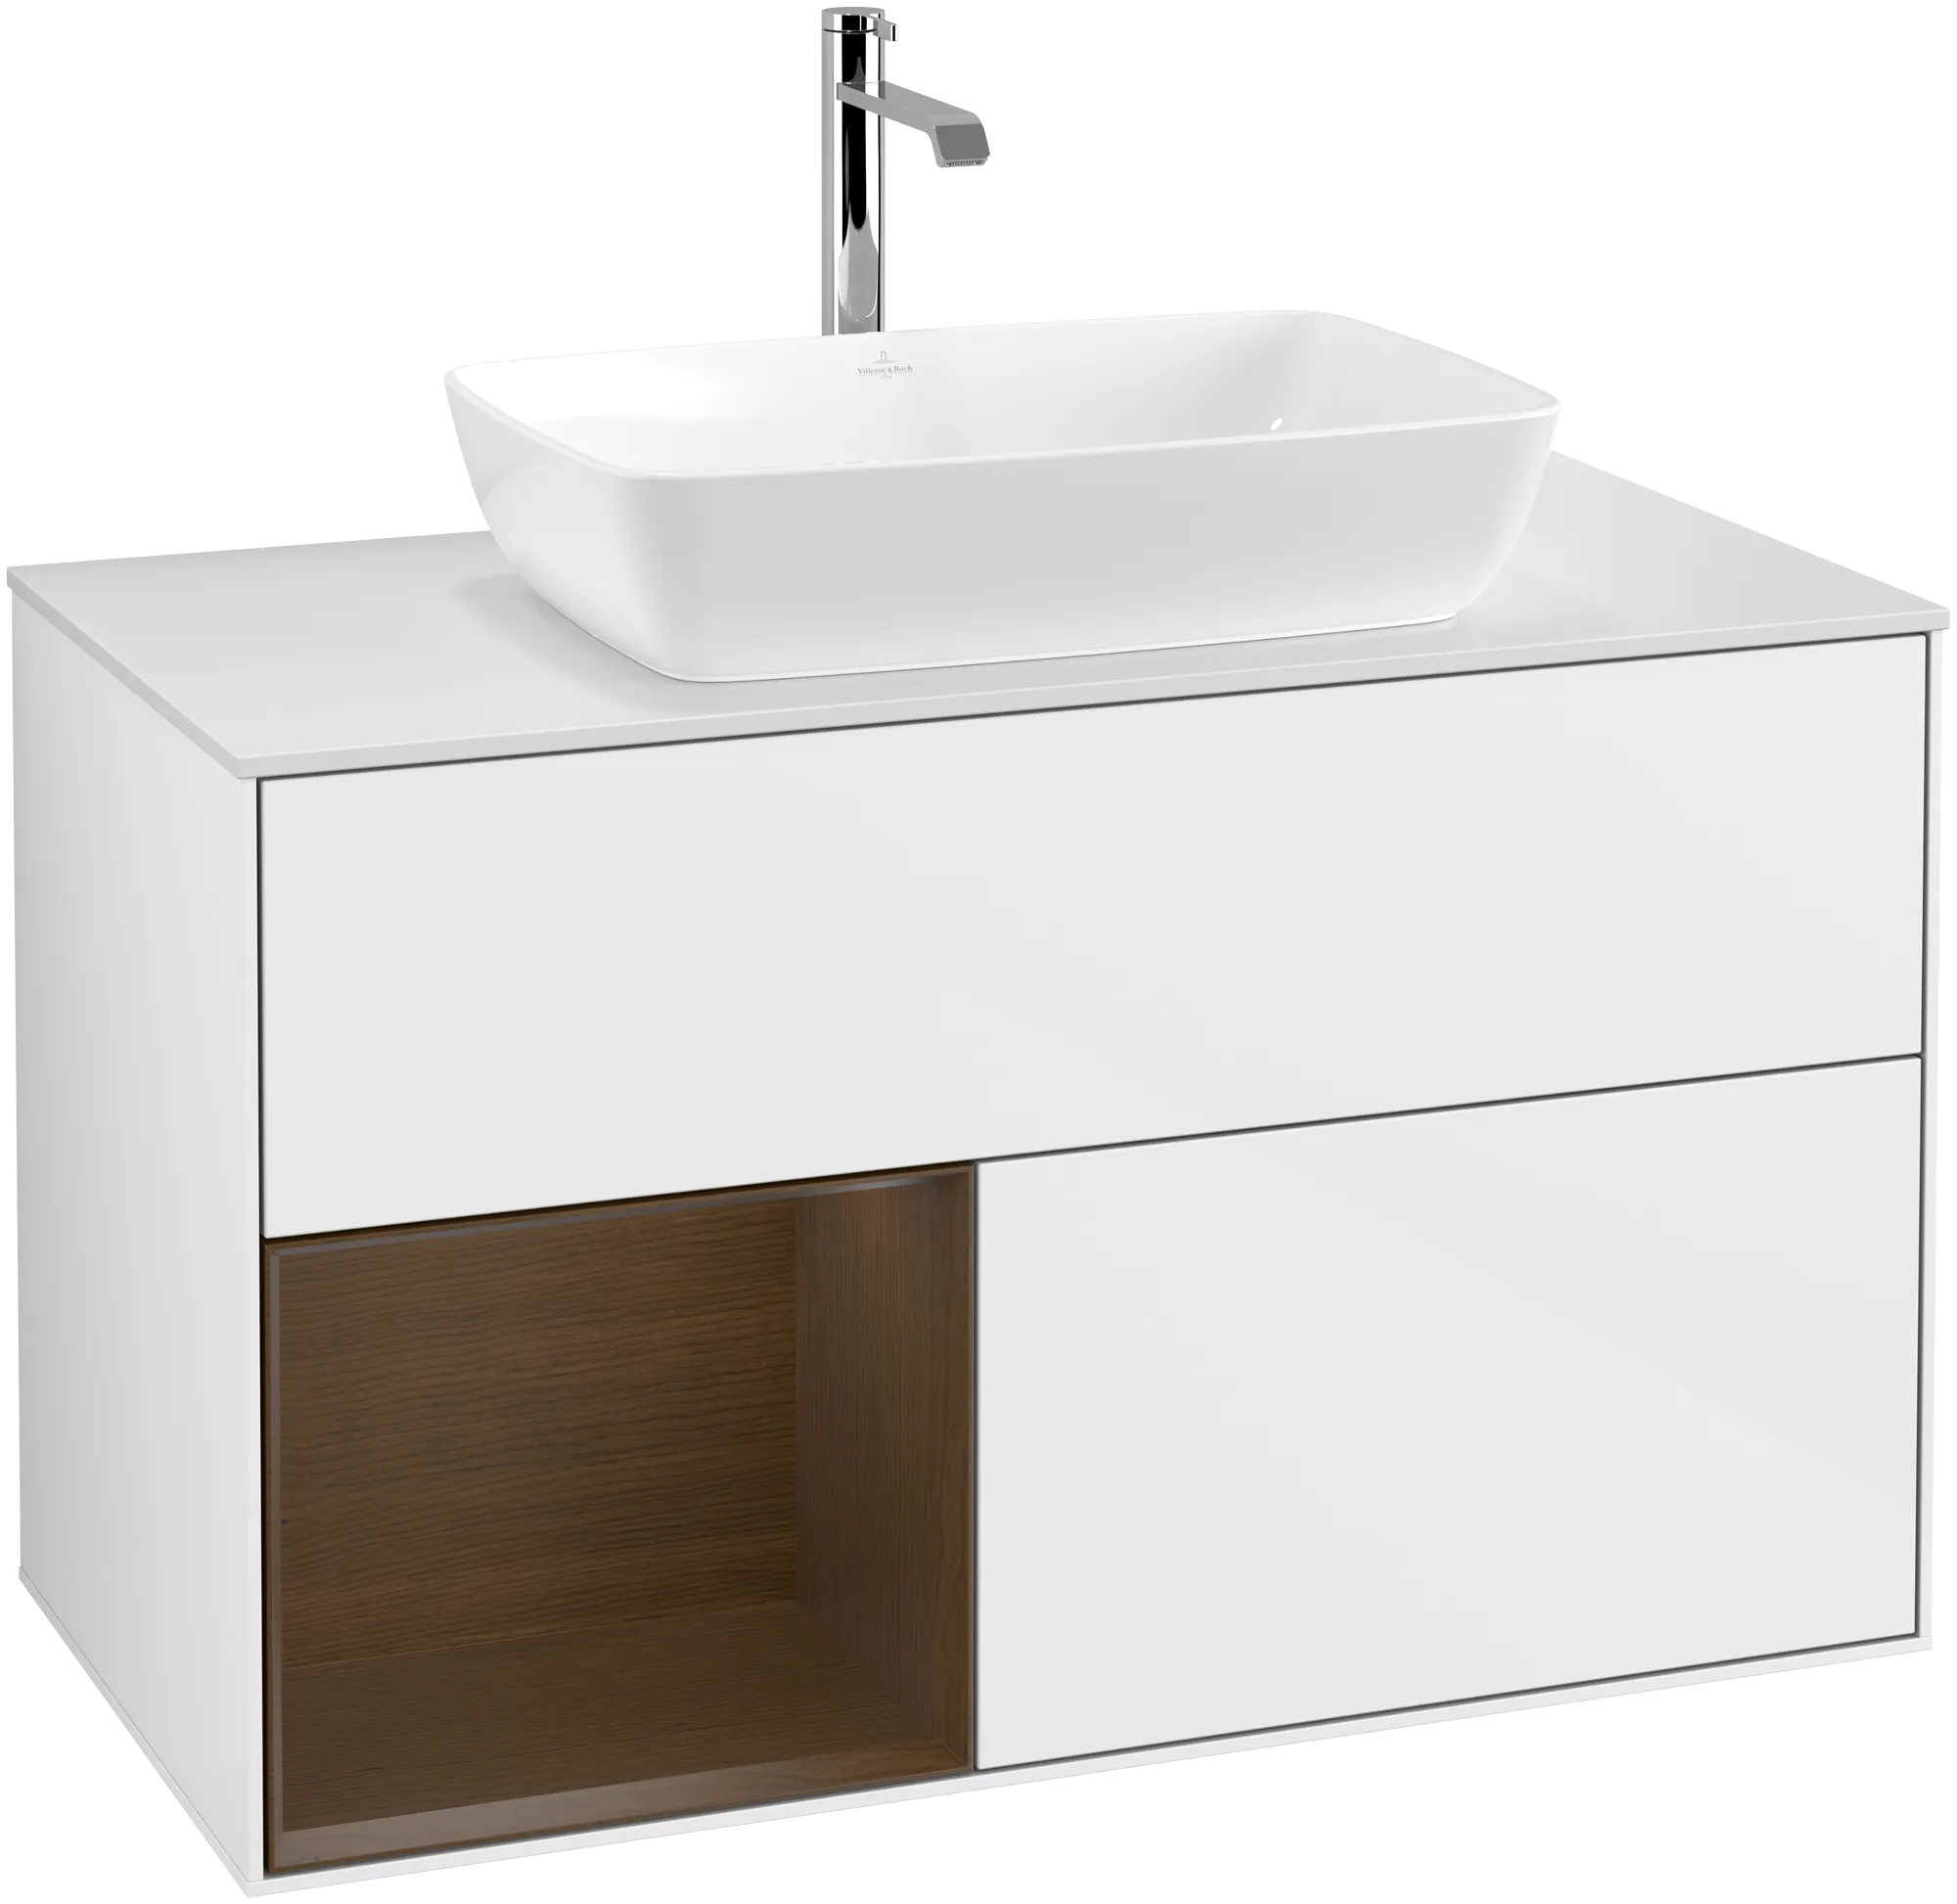 Picture of VILLEROY BOCH Finion Vanity unit, with lighting, 2 pull-out compartments, 1000 x 603 x 501 mm, Glossy White Lacquer / Walnut Veneer / Glass White Matt #G771GNGF